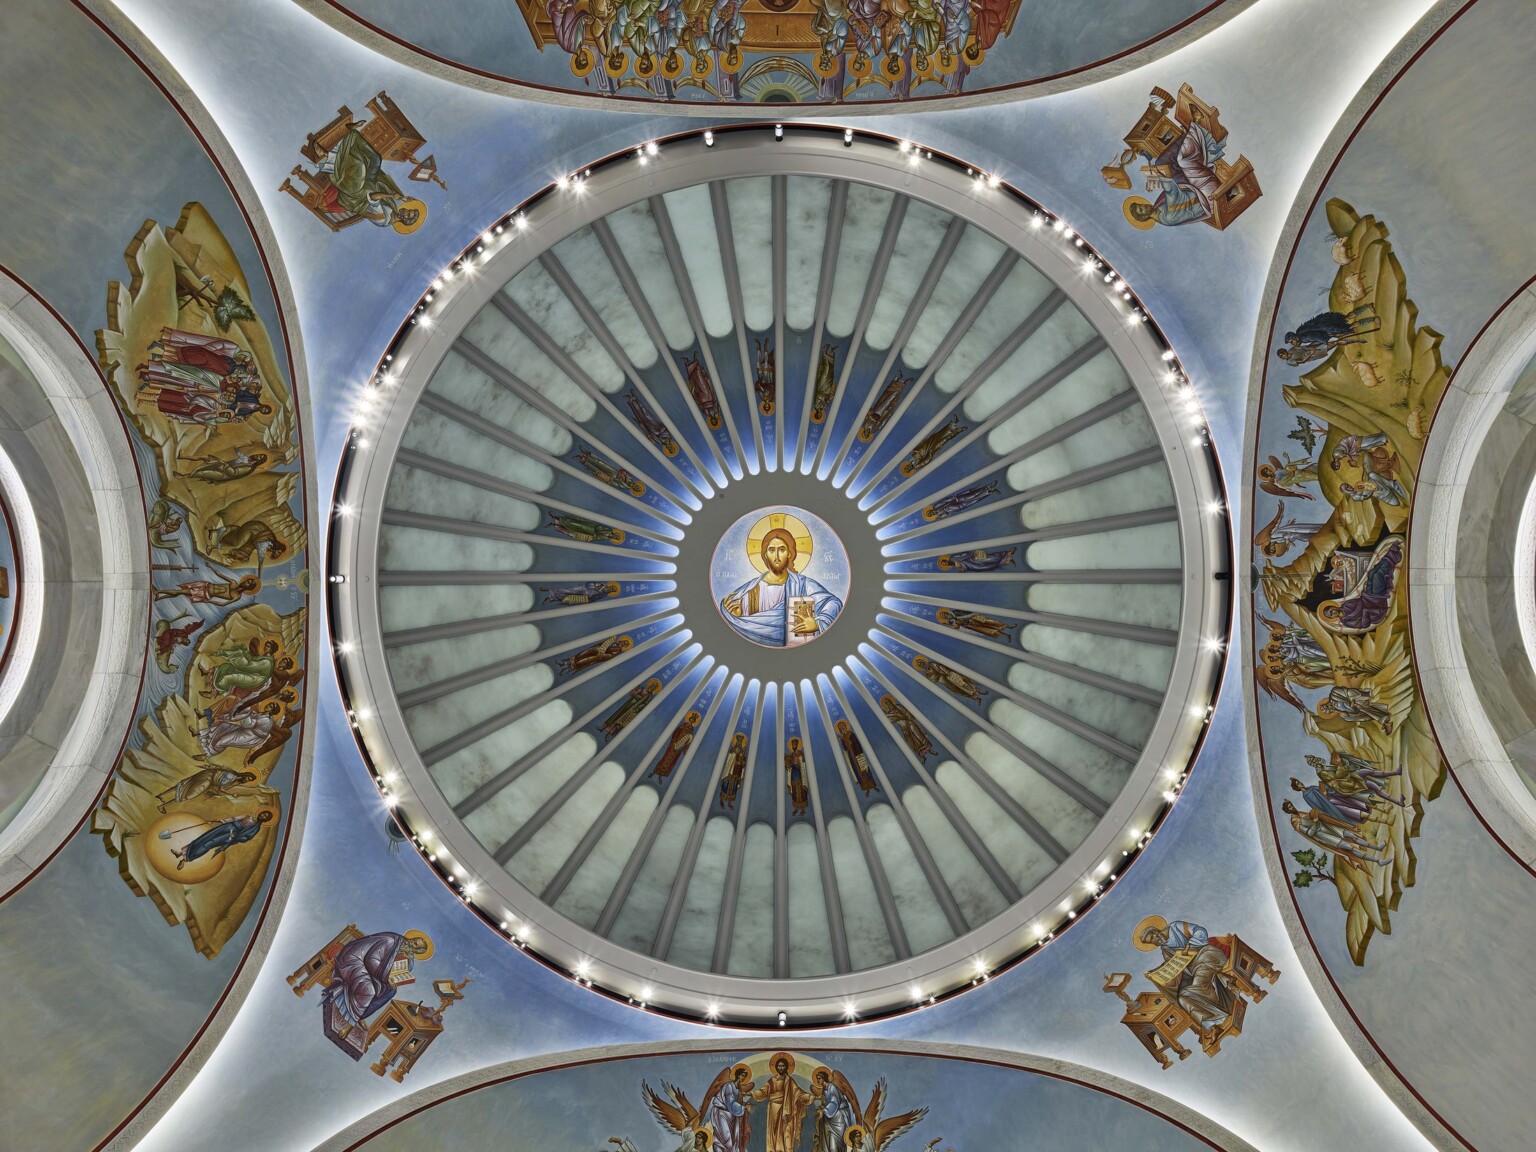 Ceiling of the Saint Nicholas Greek Orthodox Church in New York City showcasing intricate design and painting